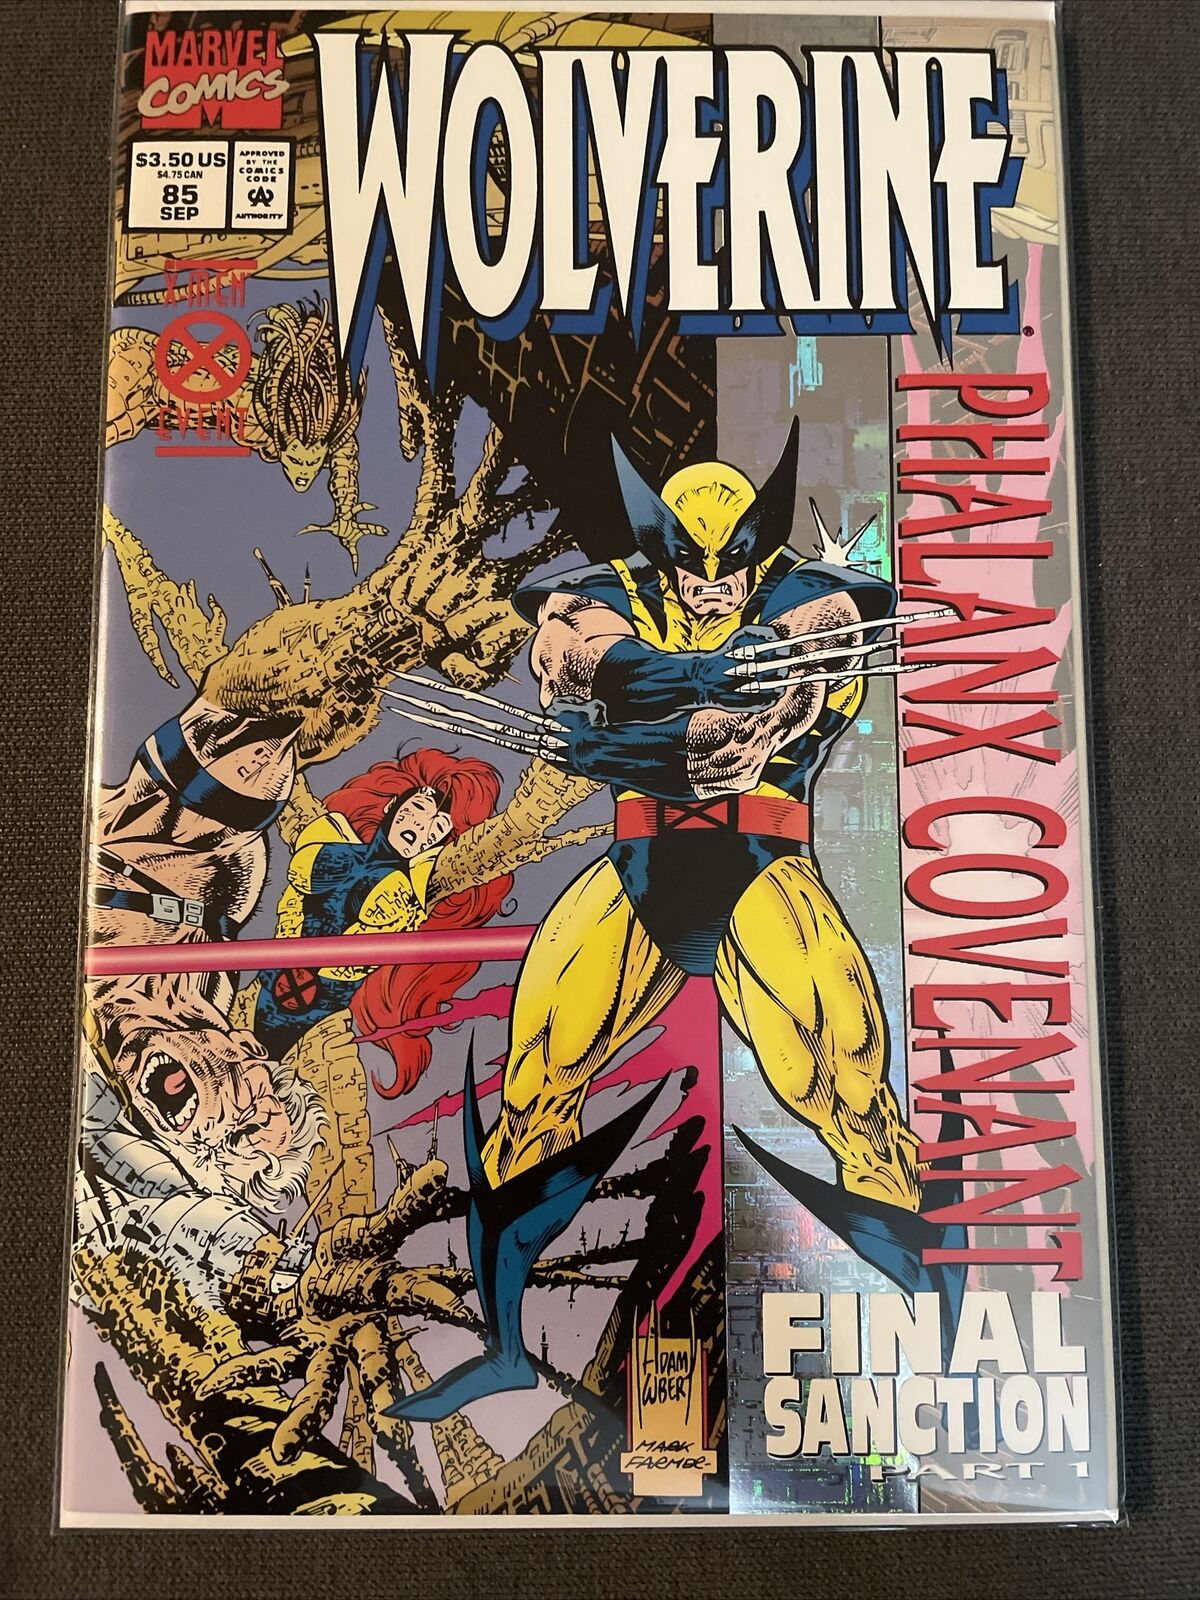 Marvel - WOLVERINE #85 (Great Condition) bagged and boarded